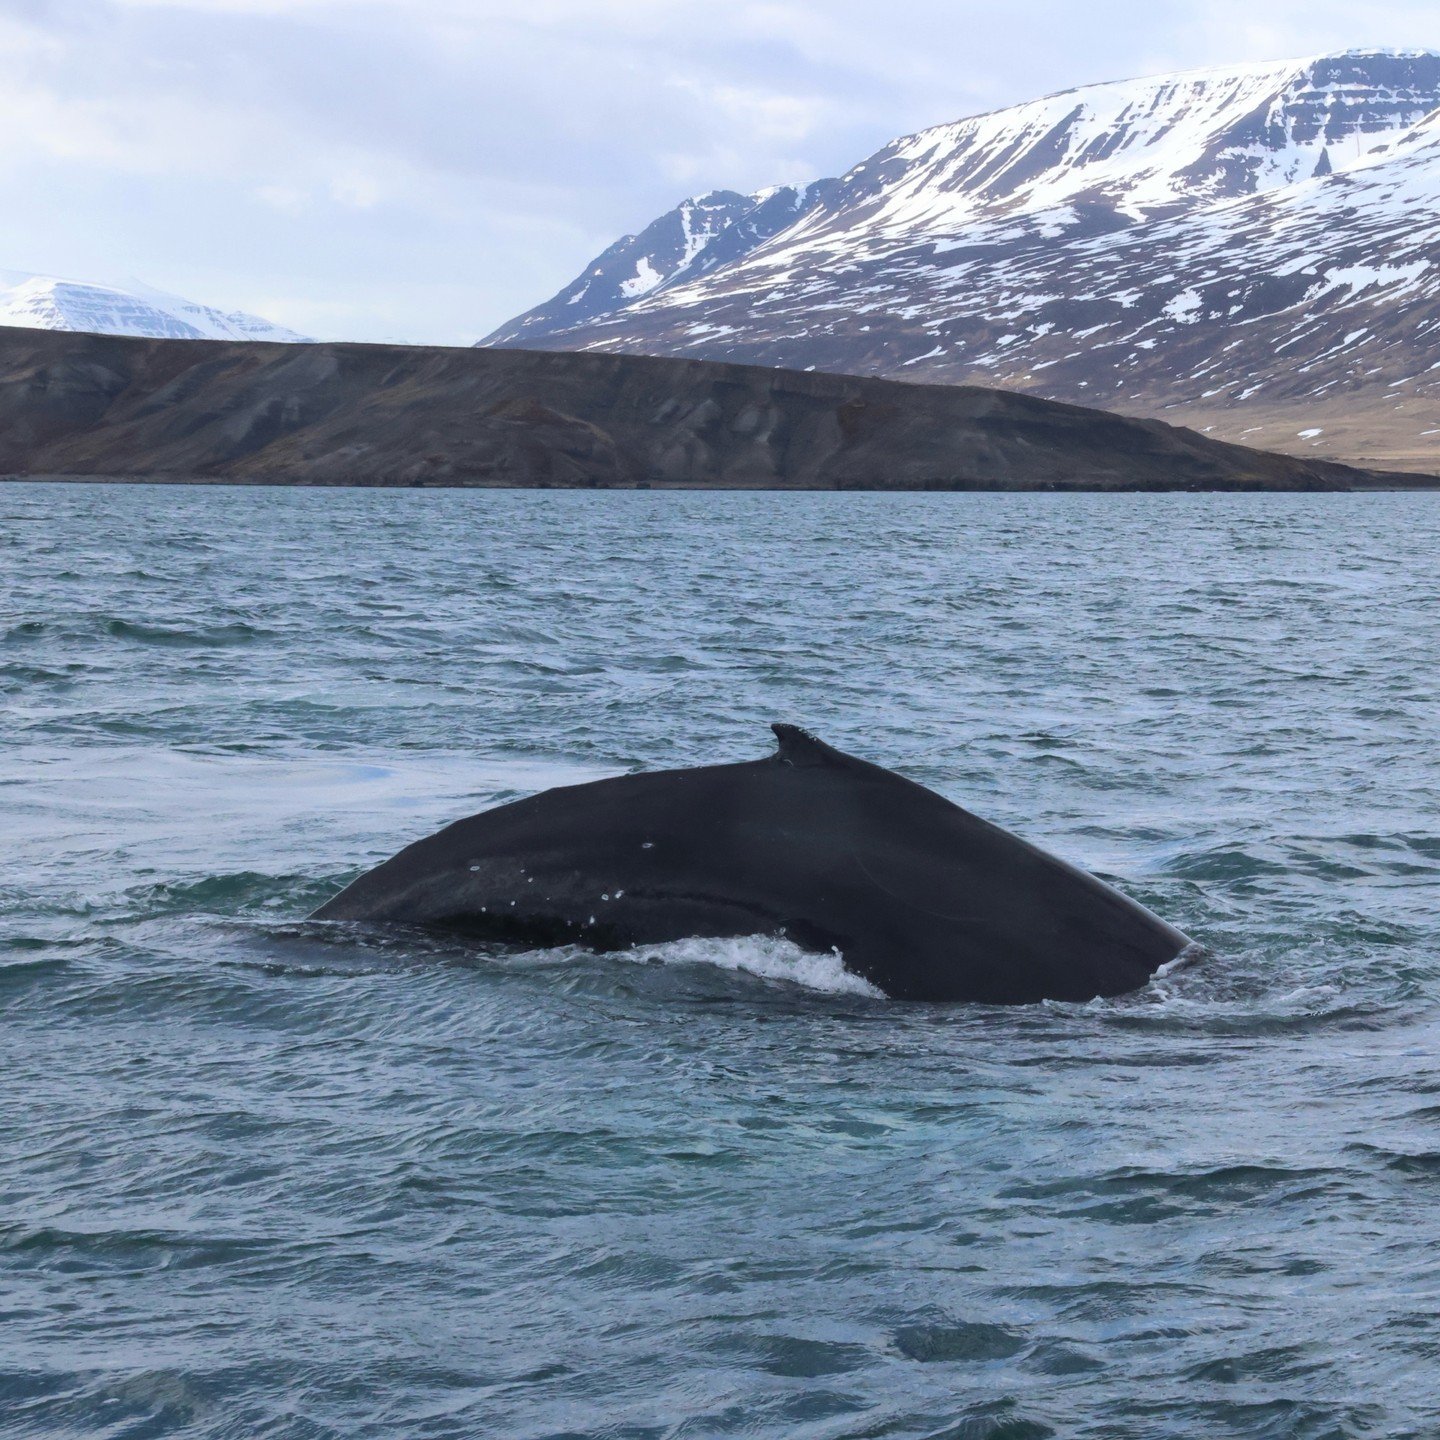 Jonna is lately outdoing herself with her wildlife photography - here is a Humpback whale passing by our boat! Jonna&rsquo;s recent tours had magical encounters with whales curiously coming to the boats or swimming parallel with us. Simply unforgetta